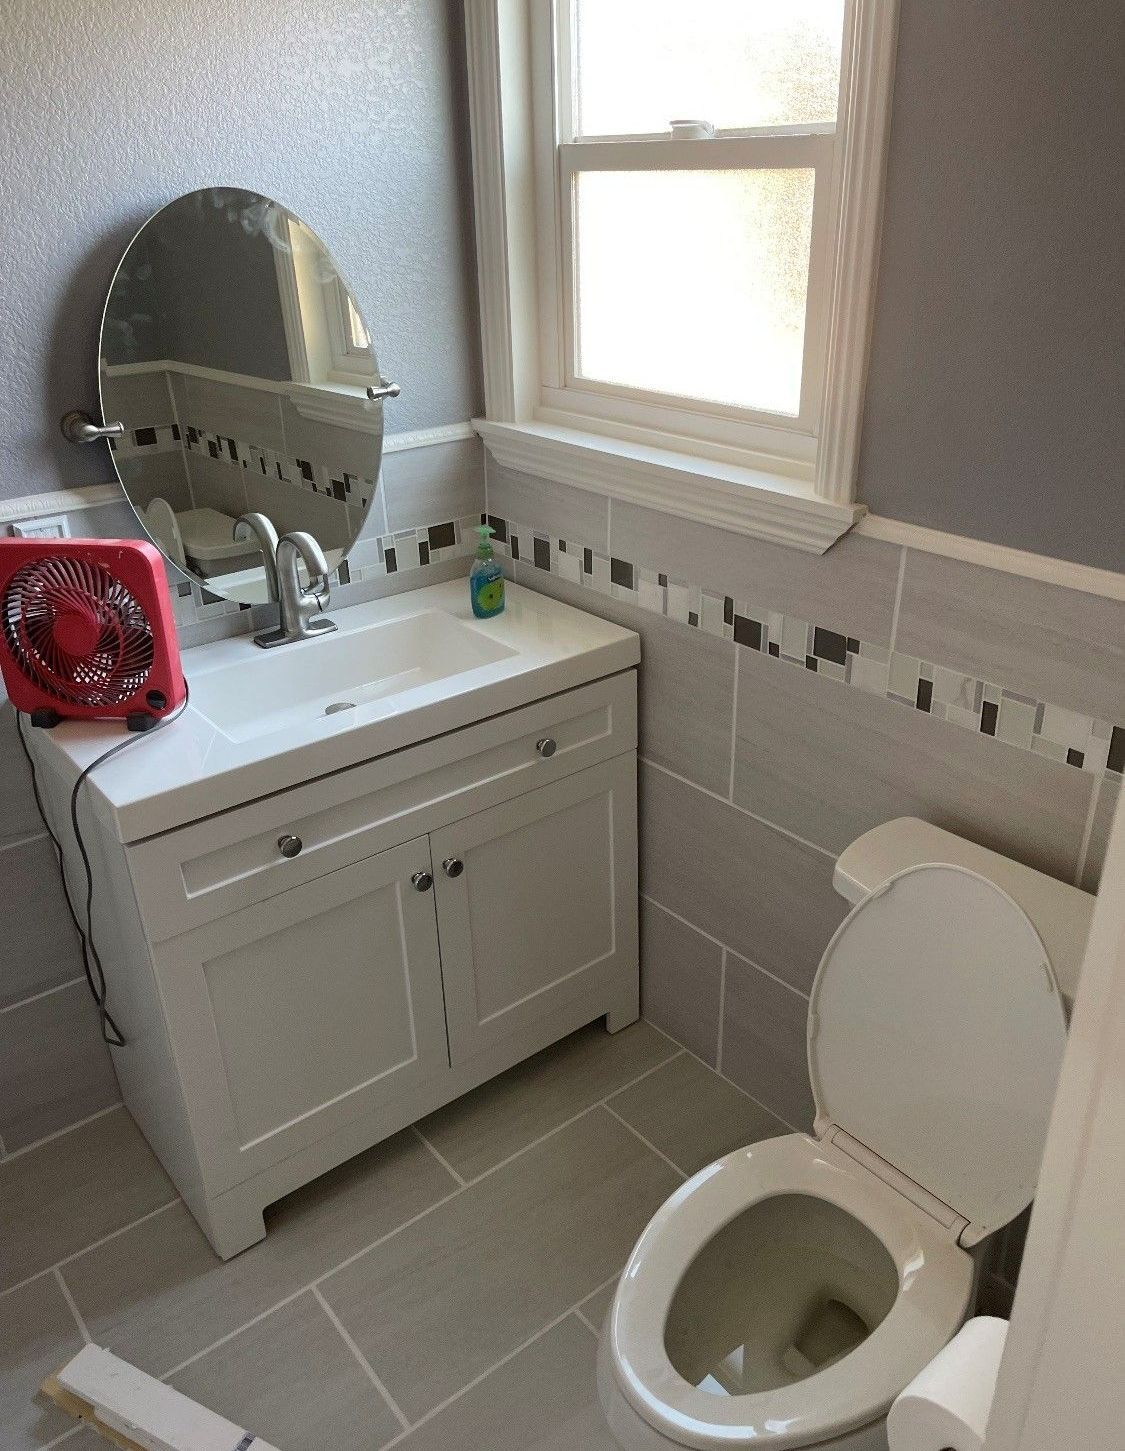 A bathroom in Oakdale, CA, with a complete bathroom remodel 